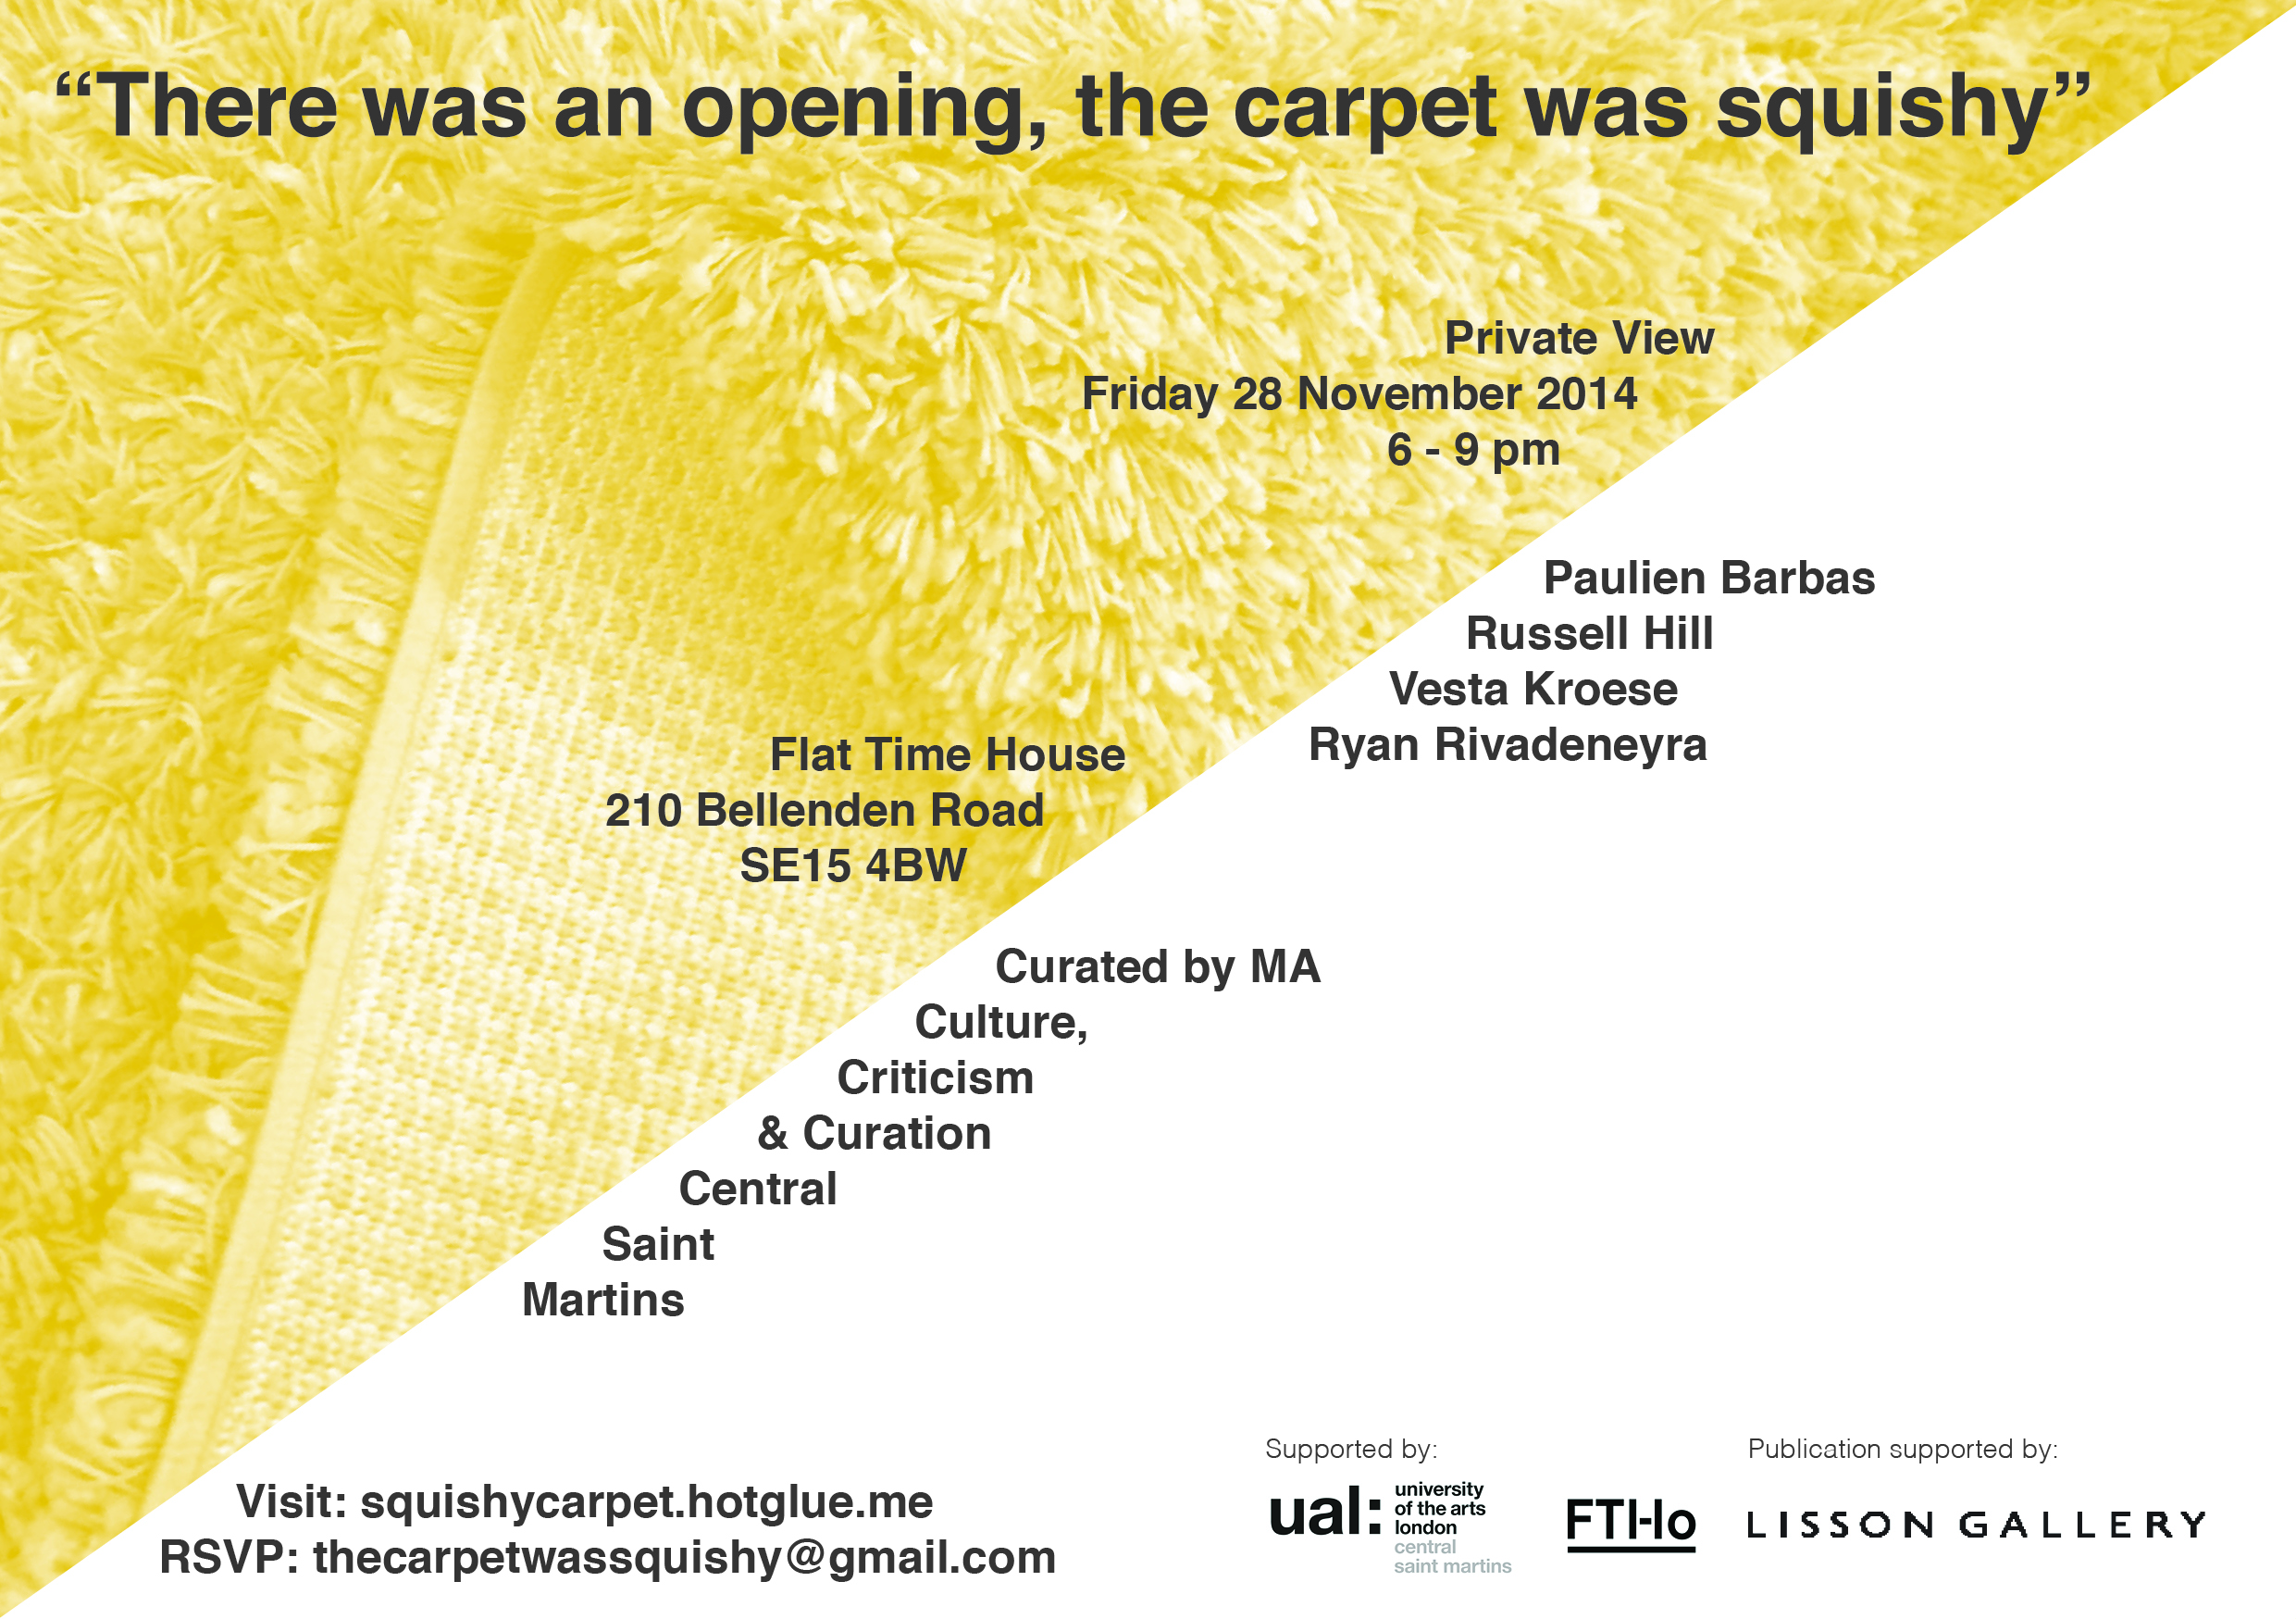  (There was an opening, the carpet was squishy 2)